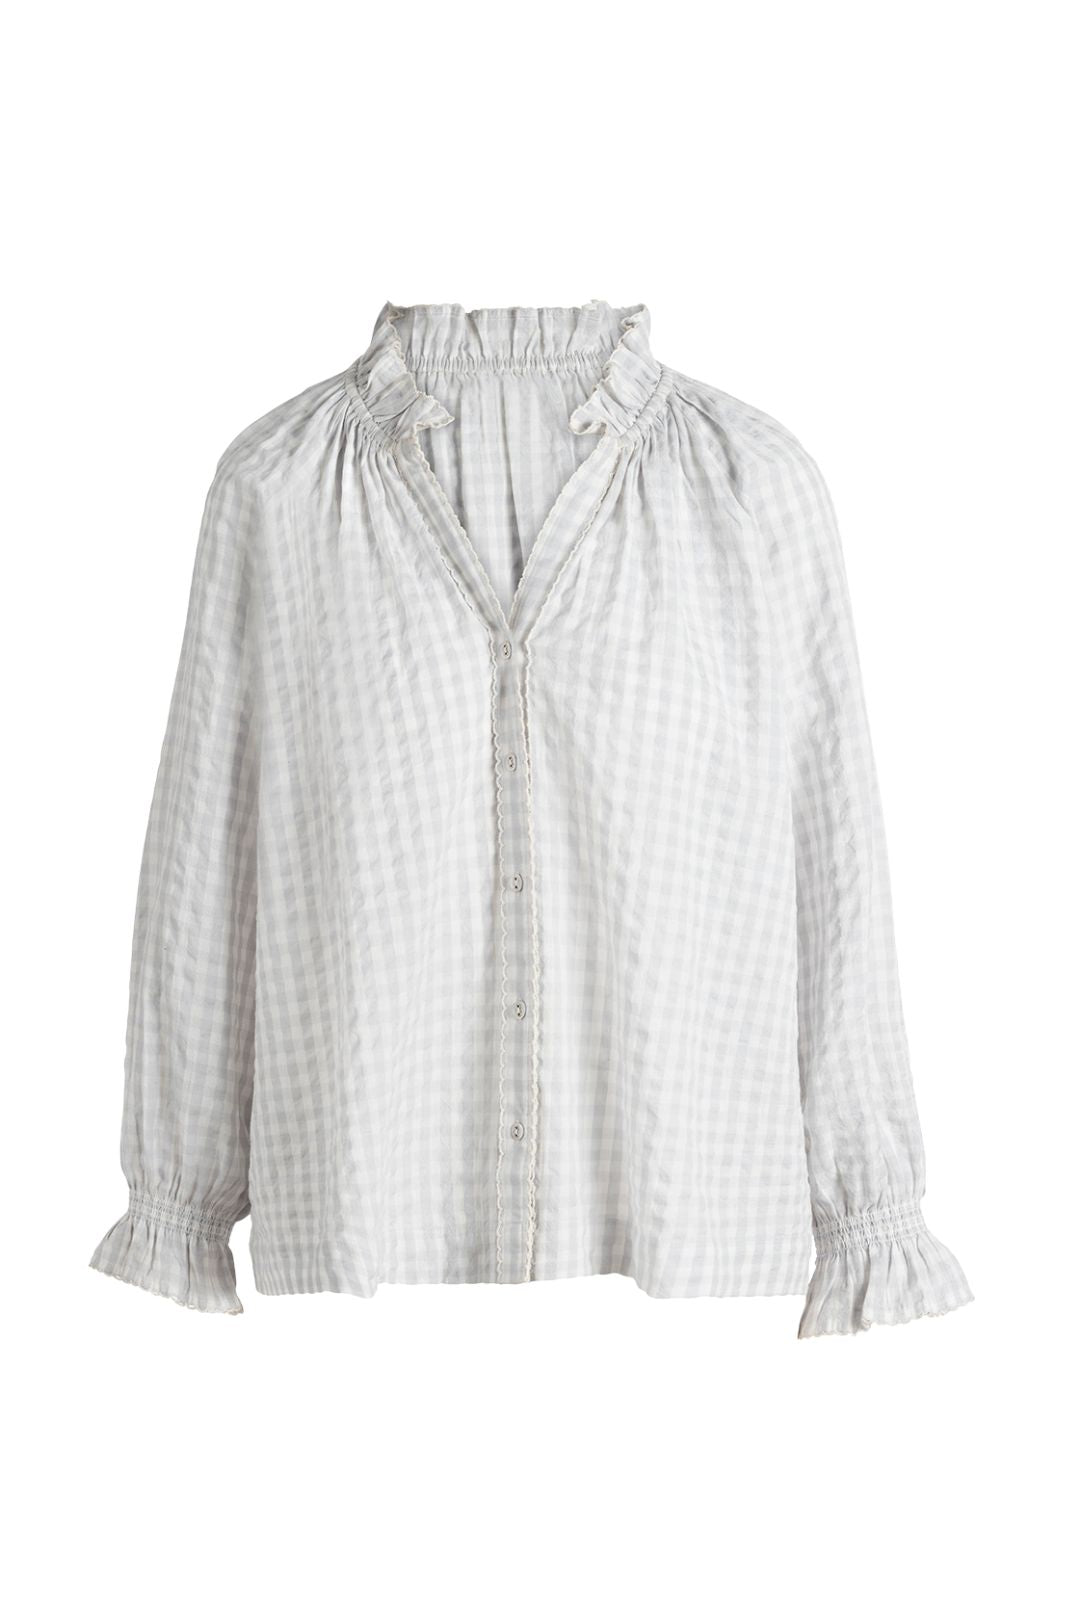 Product shot of the Harper Top in Harbor Gingham